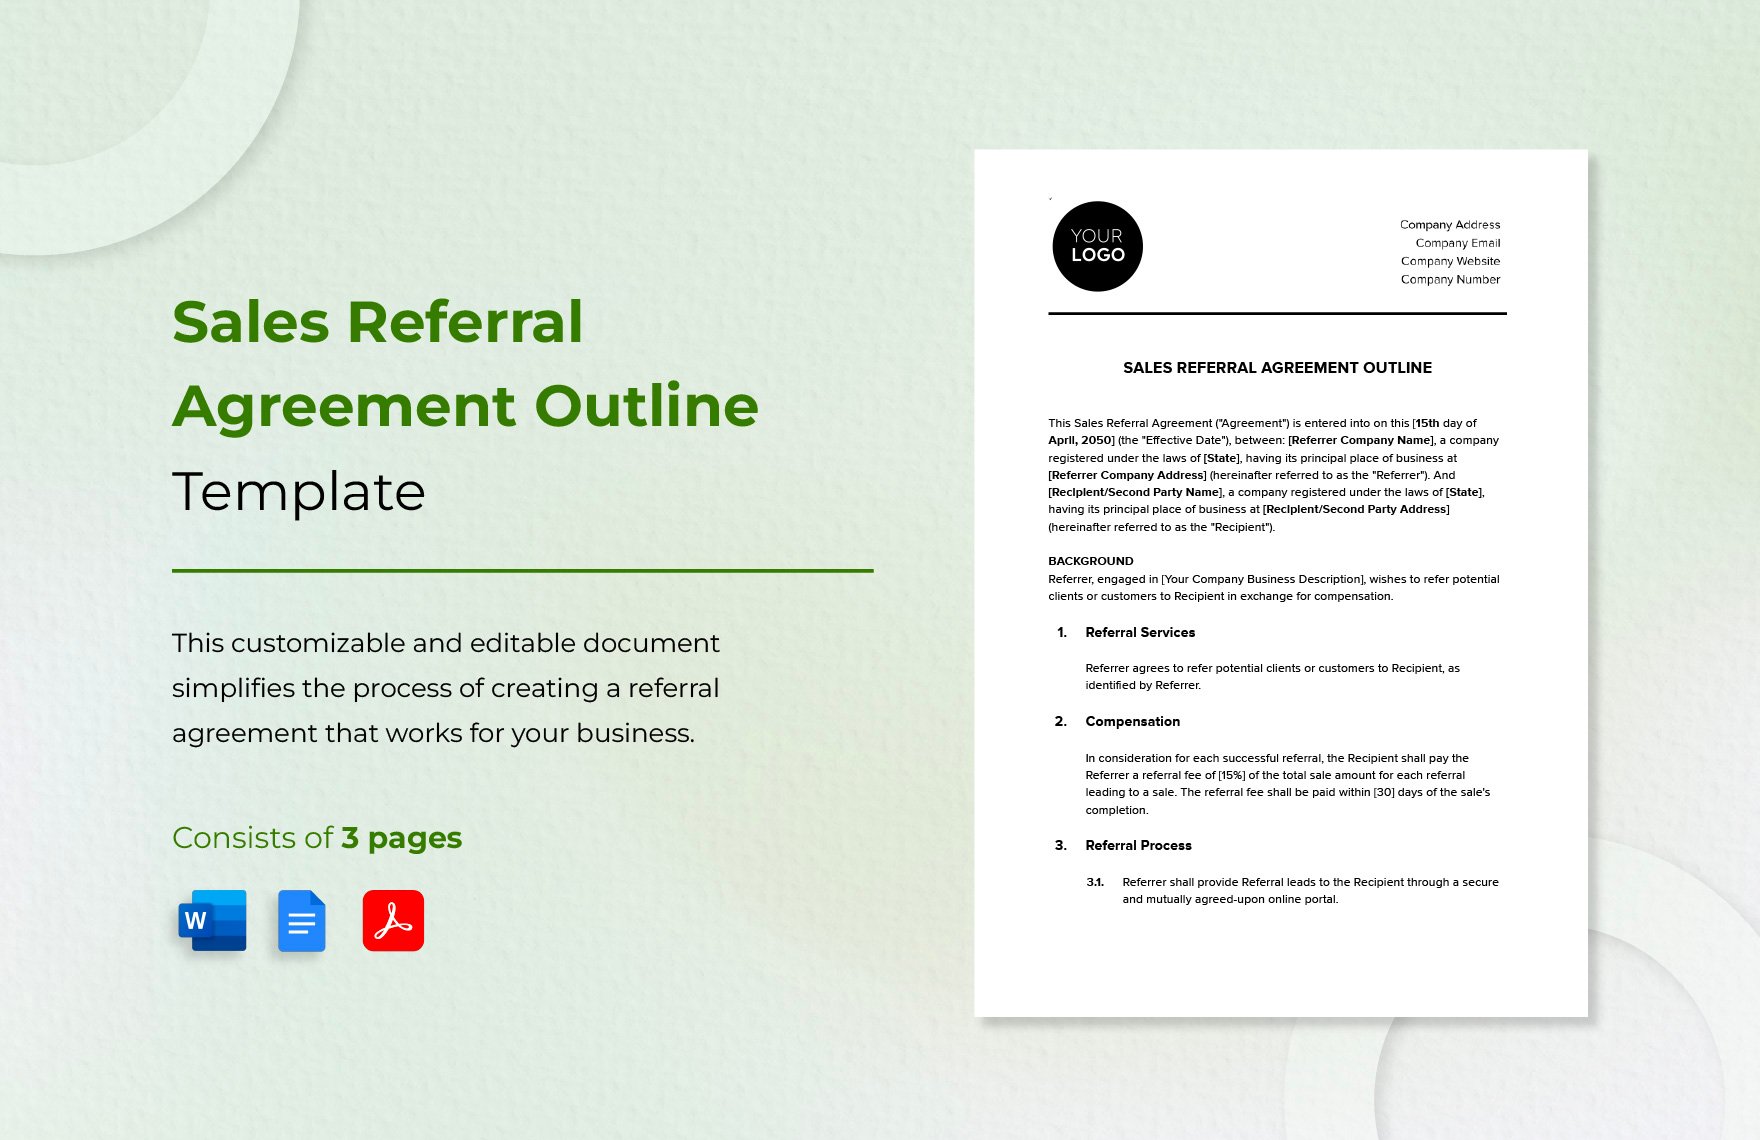 Sales Referral Agreement Outline Template in Word, Google Docs, PDF